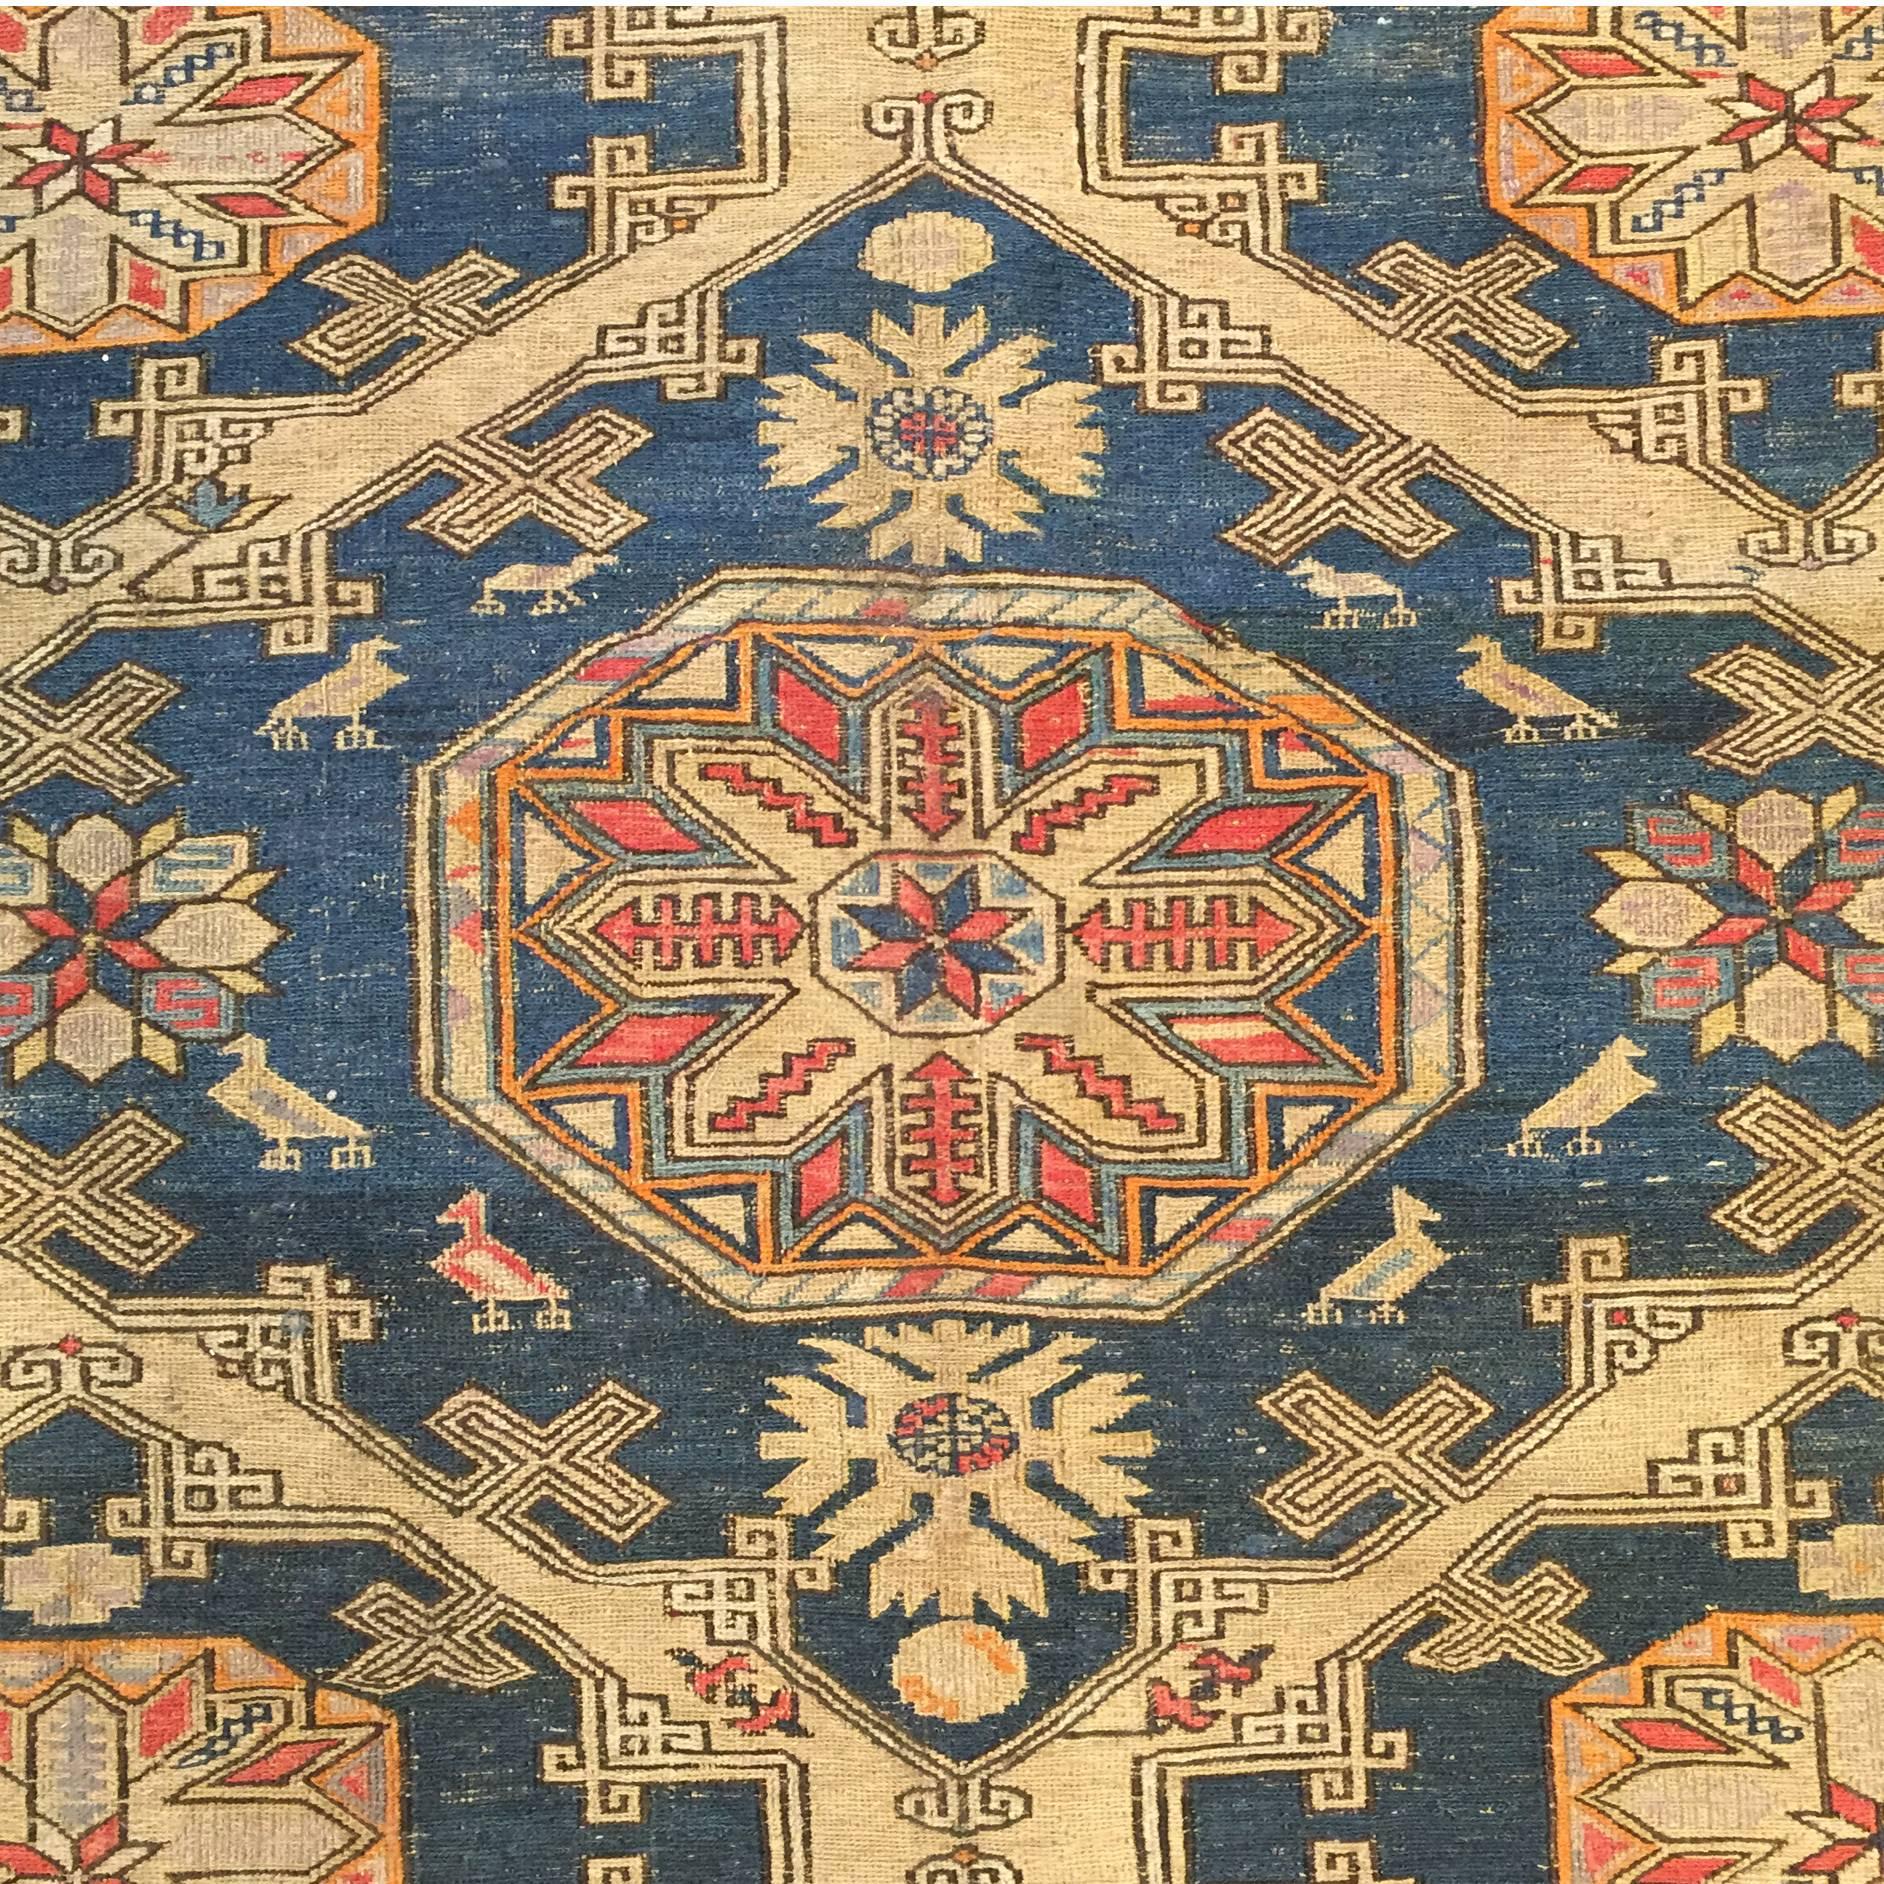 An early 20th century Persian Sumak rug with multiple beautiful medallions on an indigo background amidst a field of flowers, surrounded by multiple complementary floral borders.